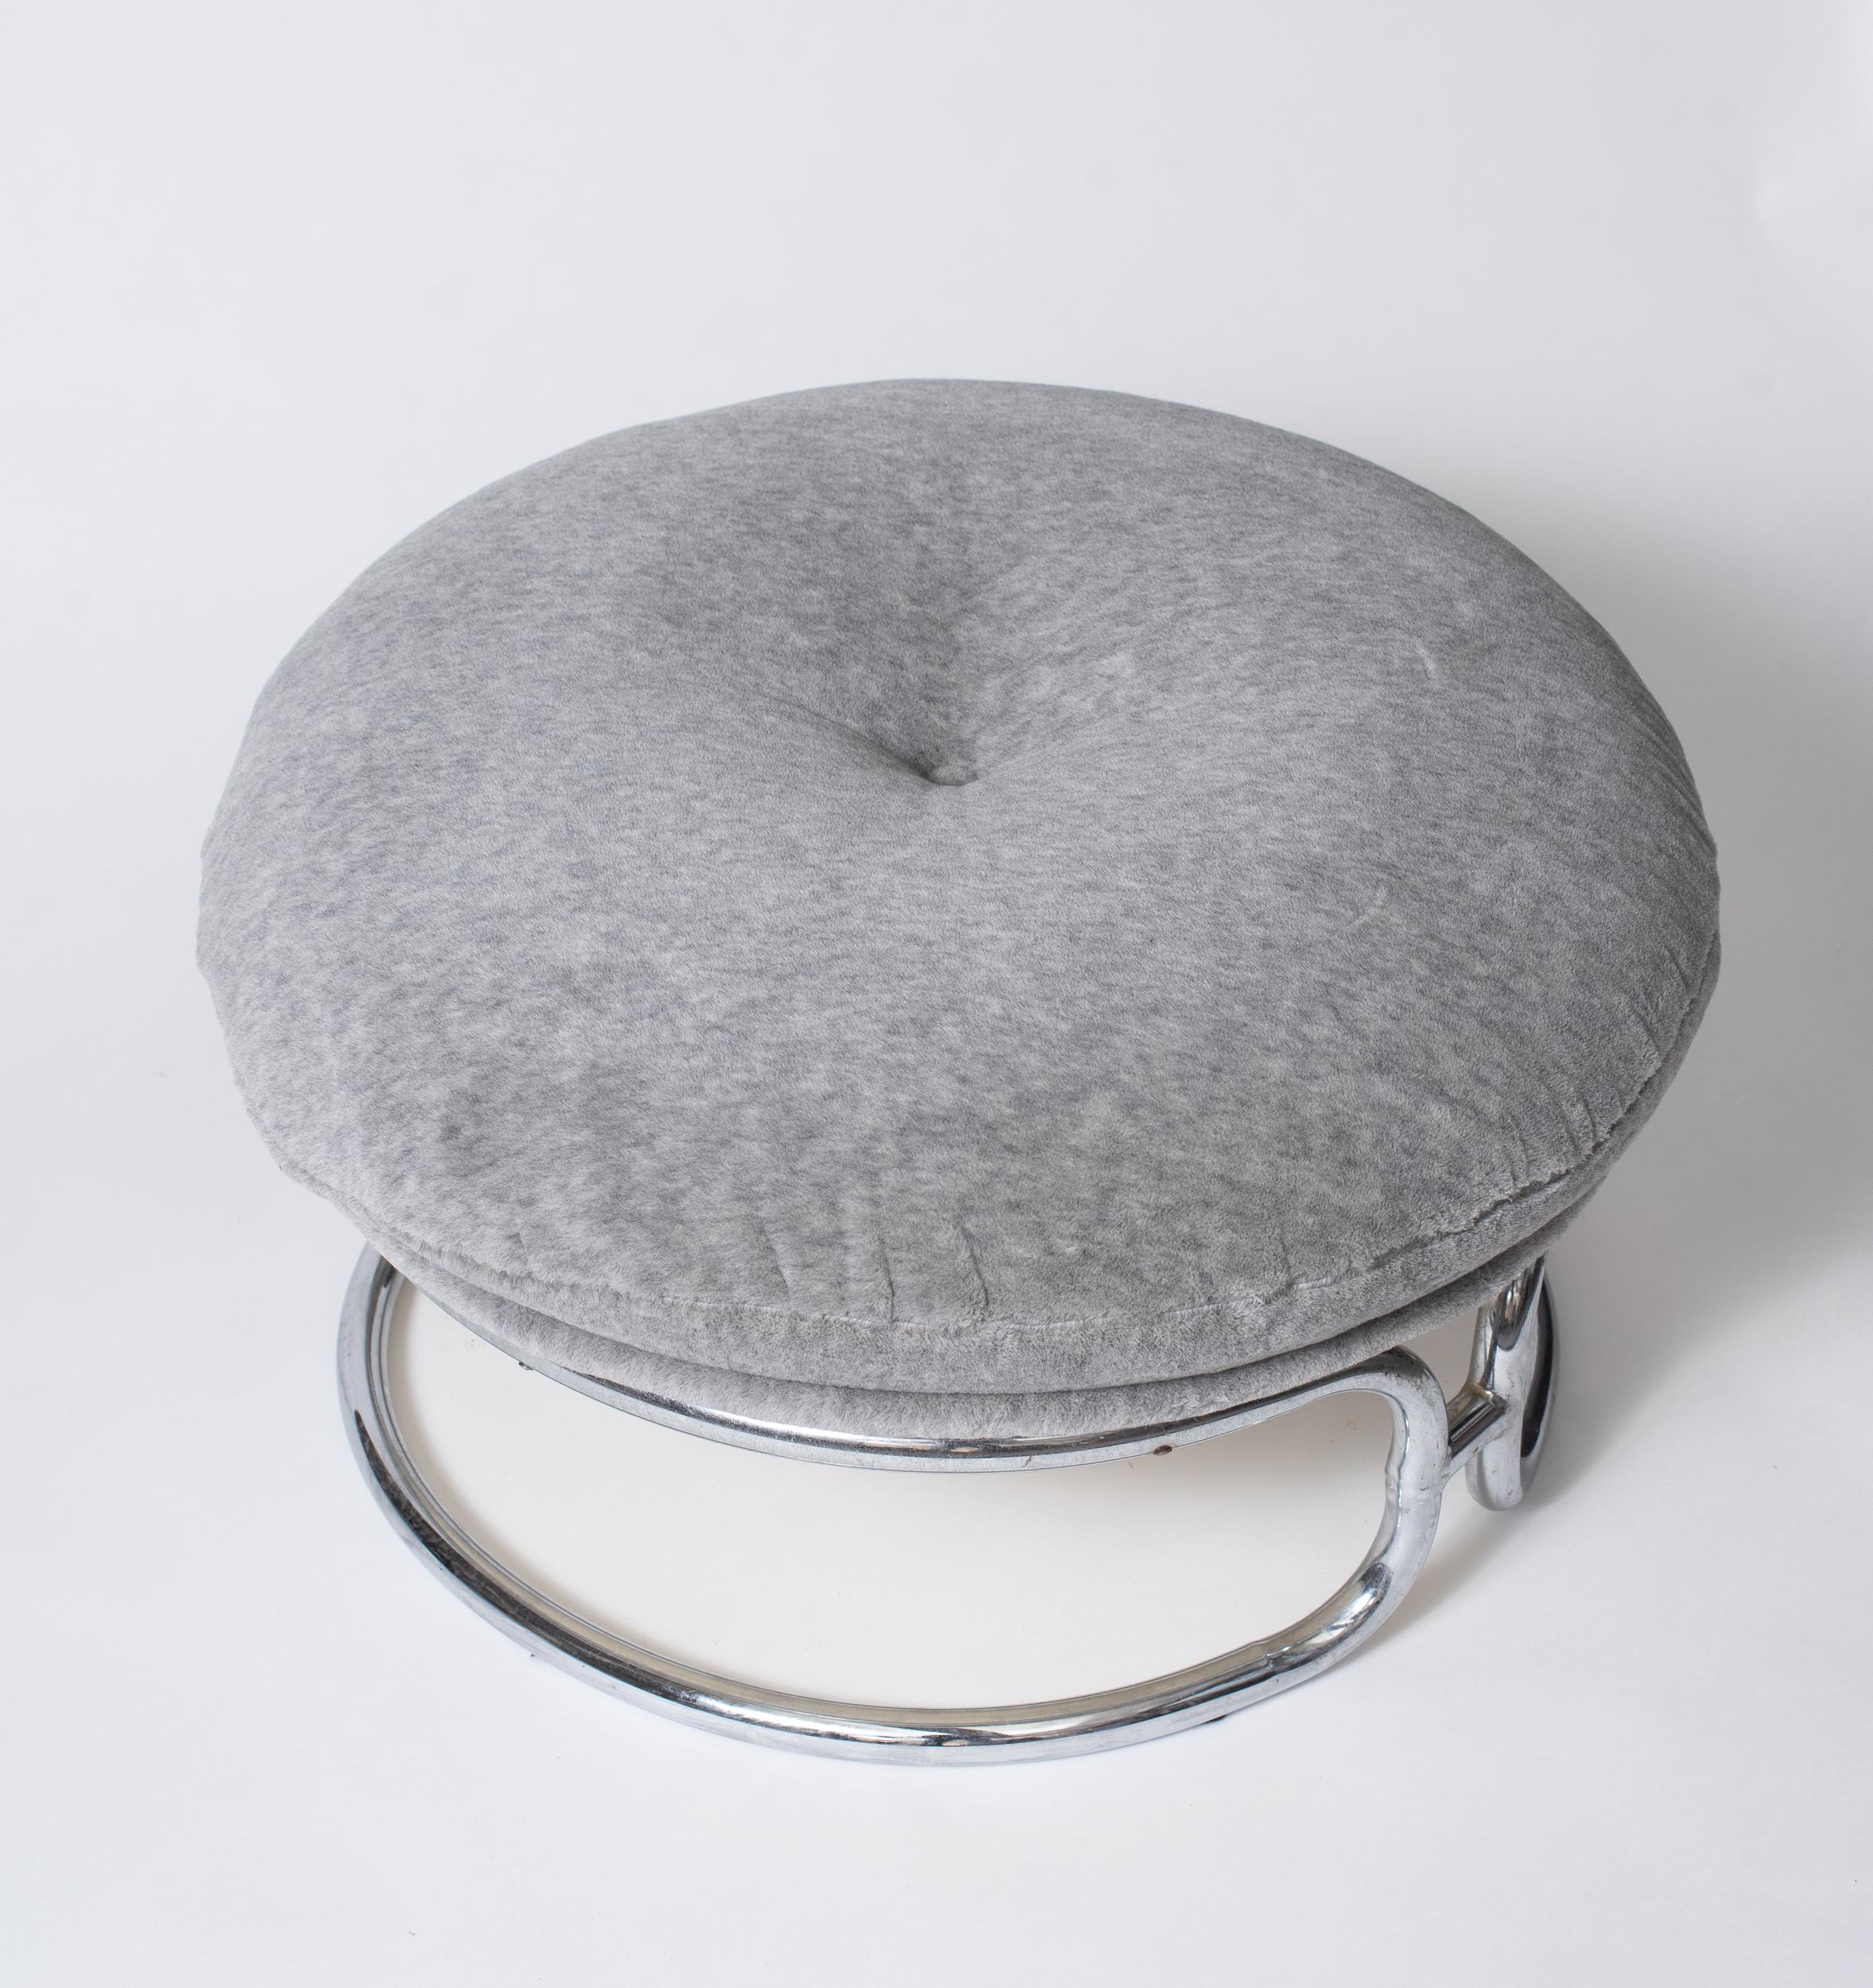 A pair of ottomans in white fiberglass shell accommodating a fabric-covered cushion with grey « Alpaga » wool from Bisson-Bruneel.
Tubular chromed metal base forming two semi-circles connected to each other.

Biography

Born in 1942, Michel Cadestin